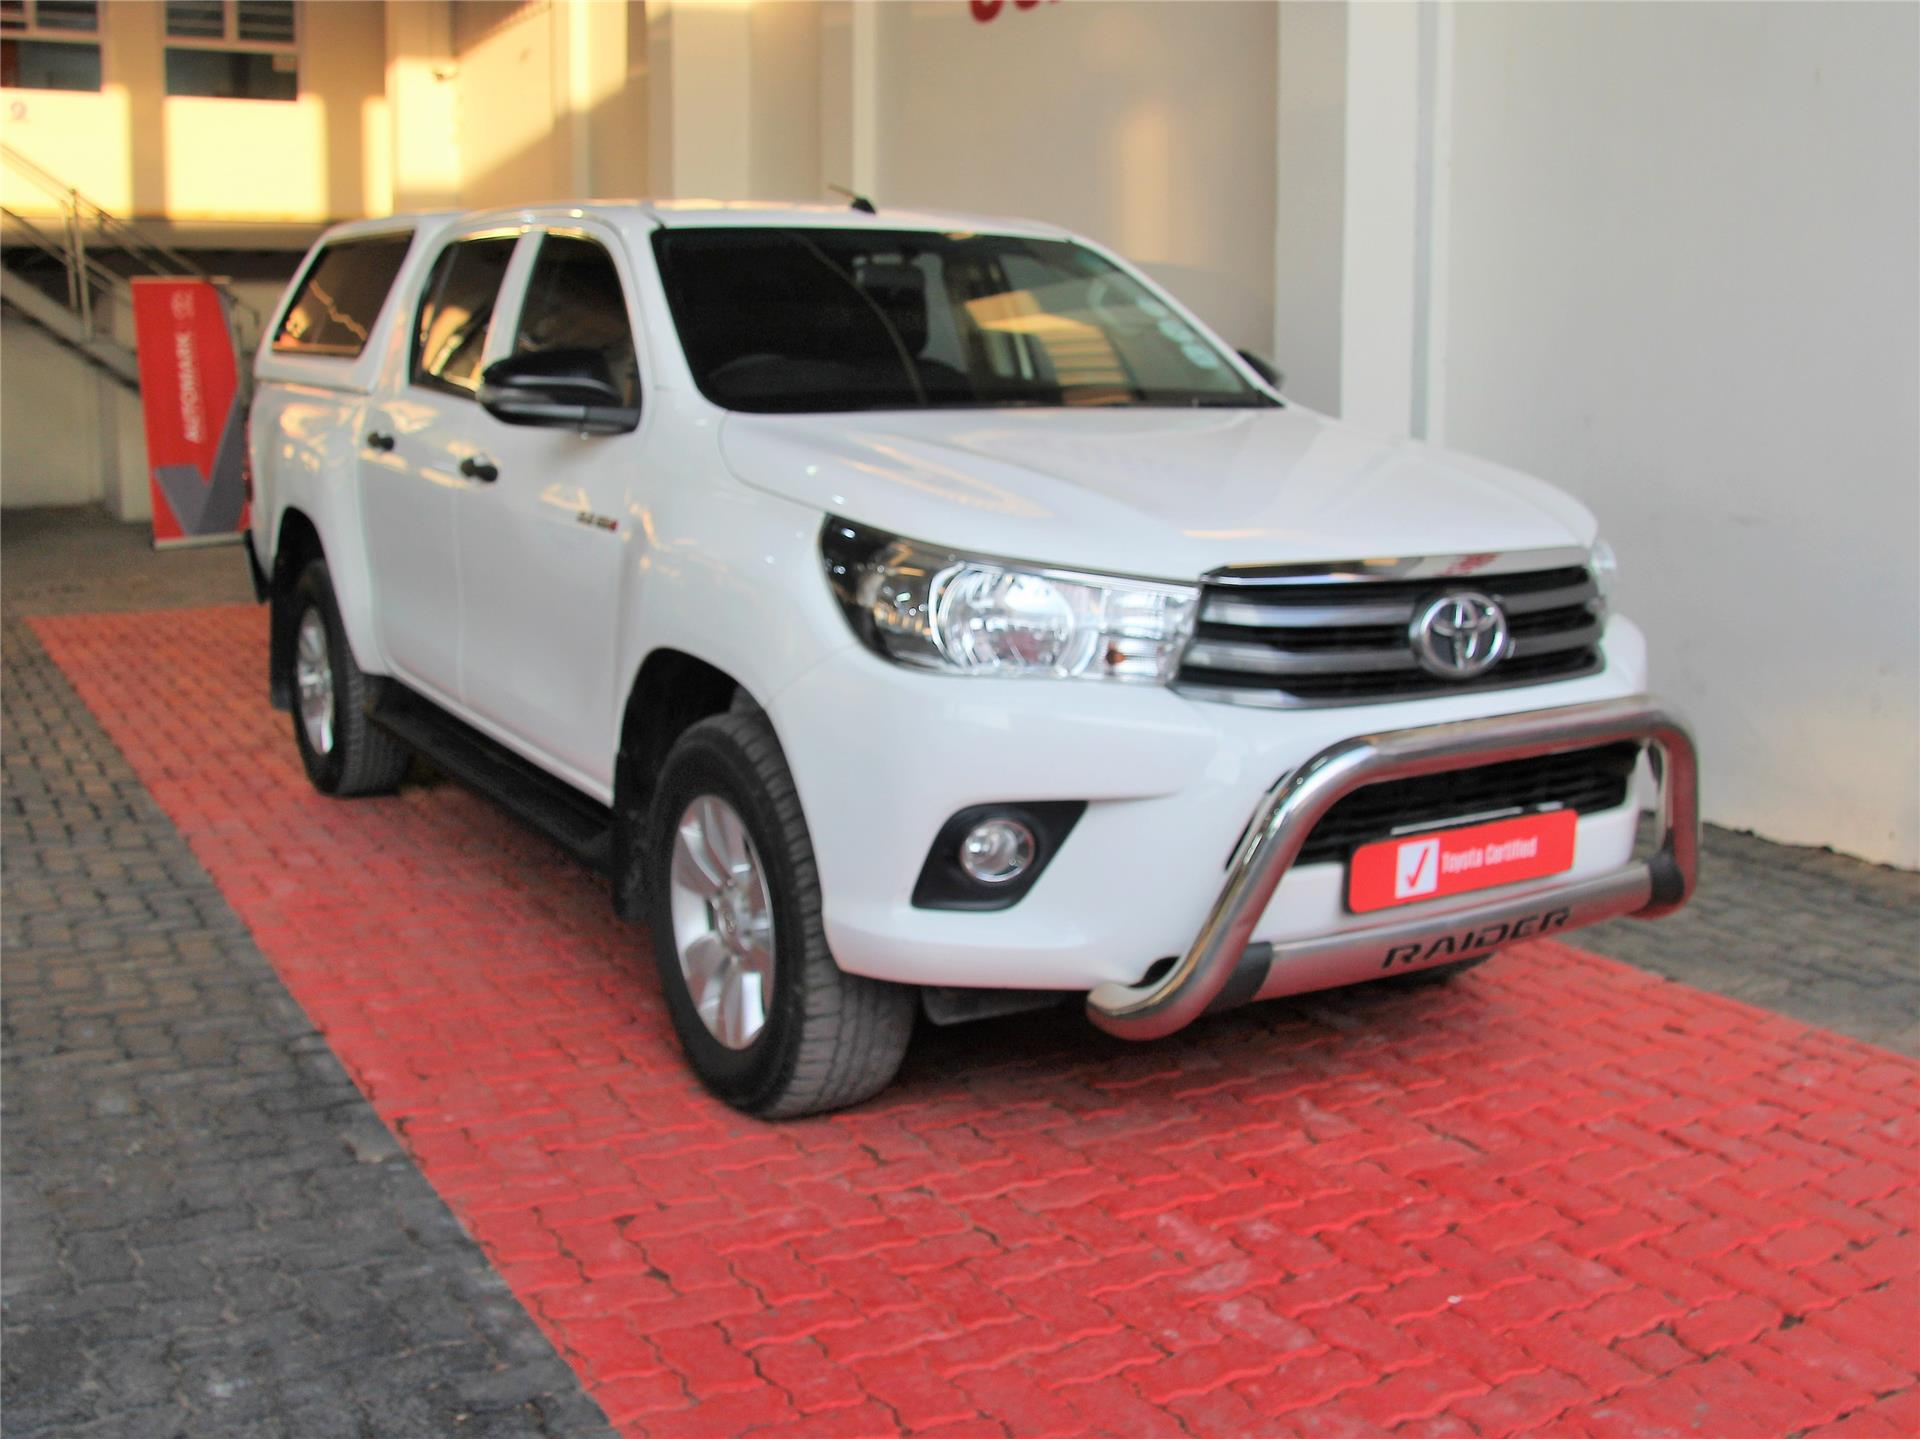 2017 Toyota Hilux Double Cab  for sale - 806431/1